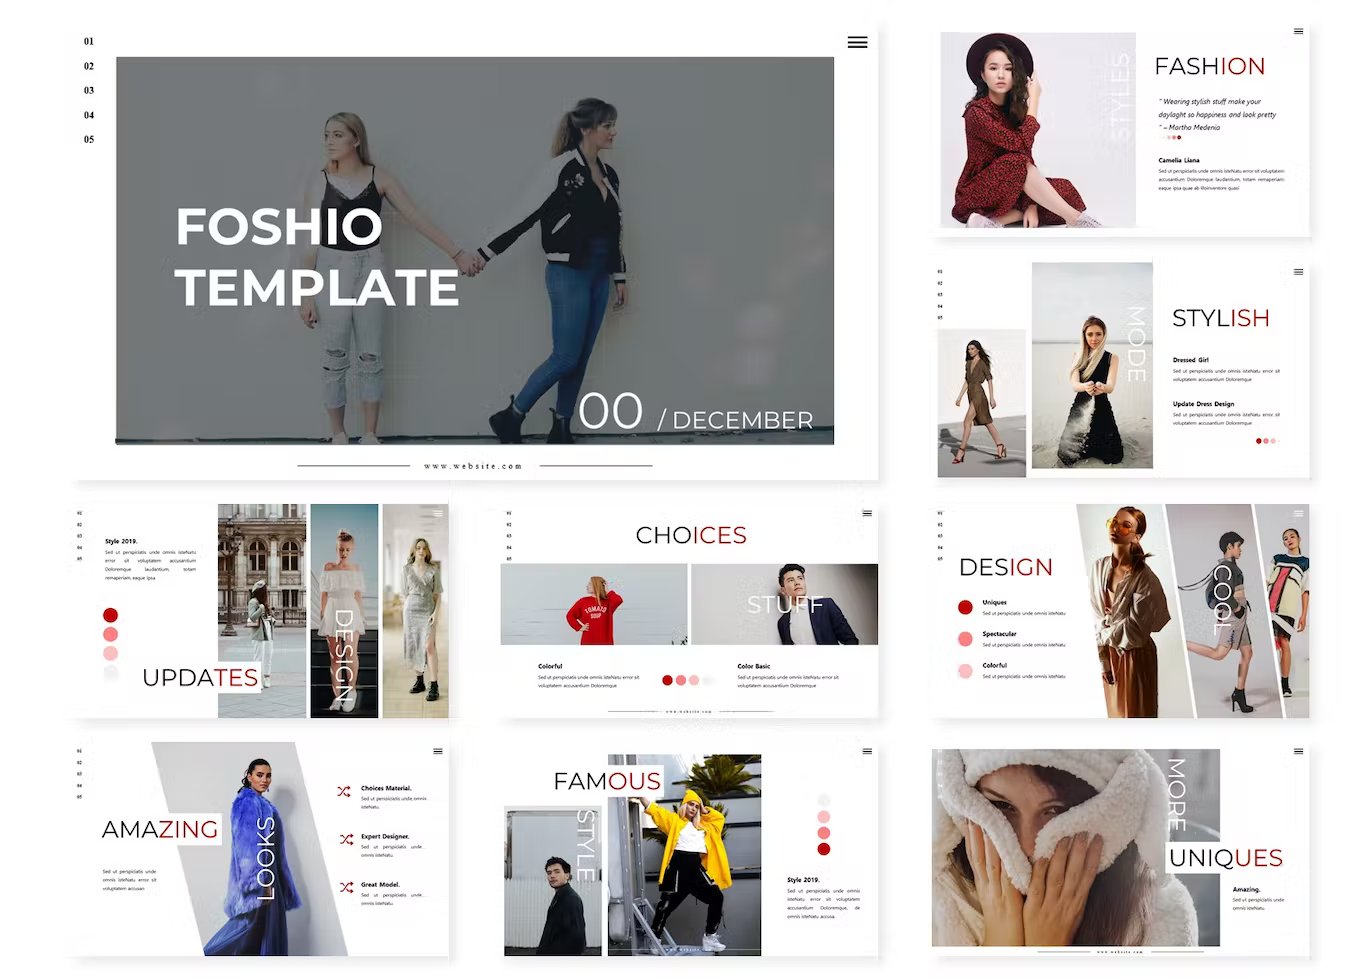 Great sets of templates for the theme of fashion.